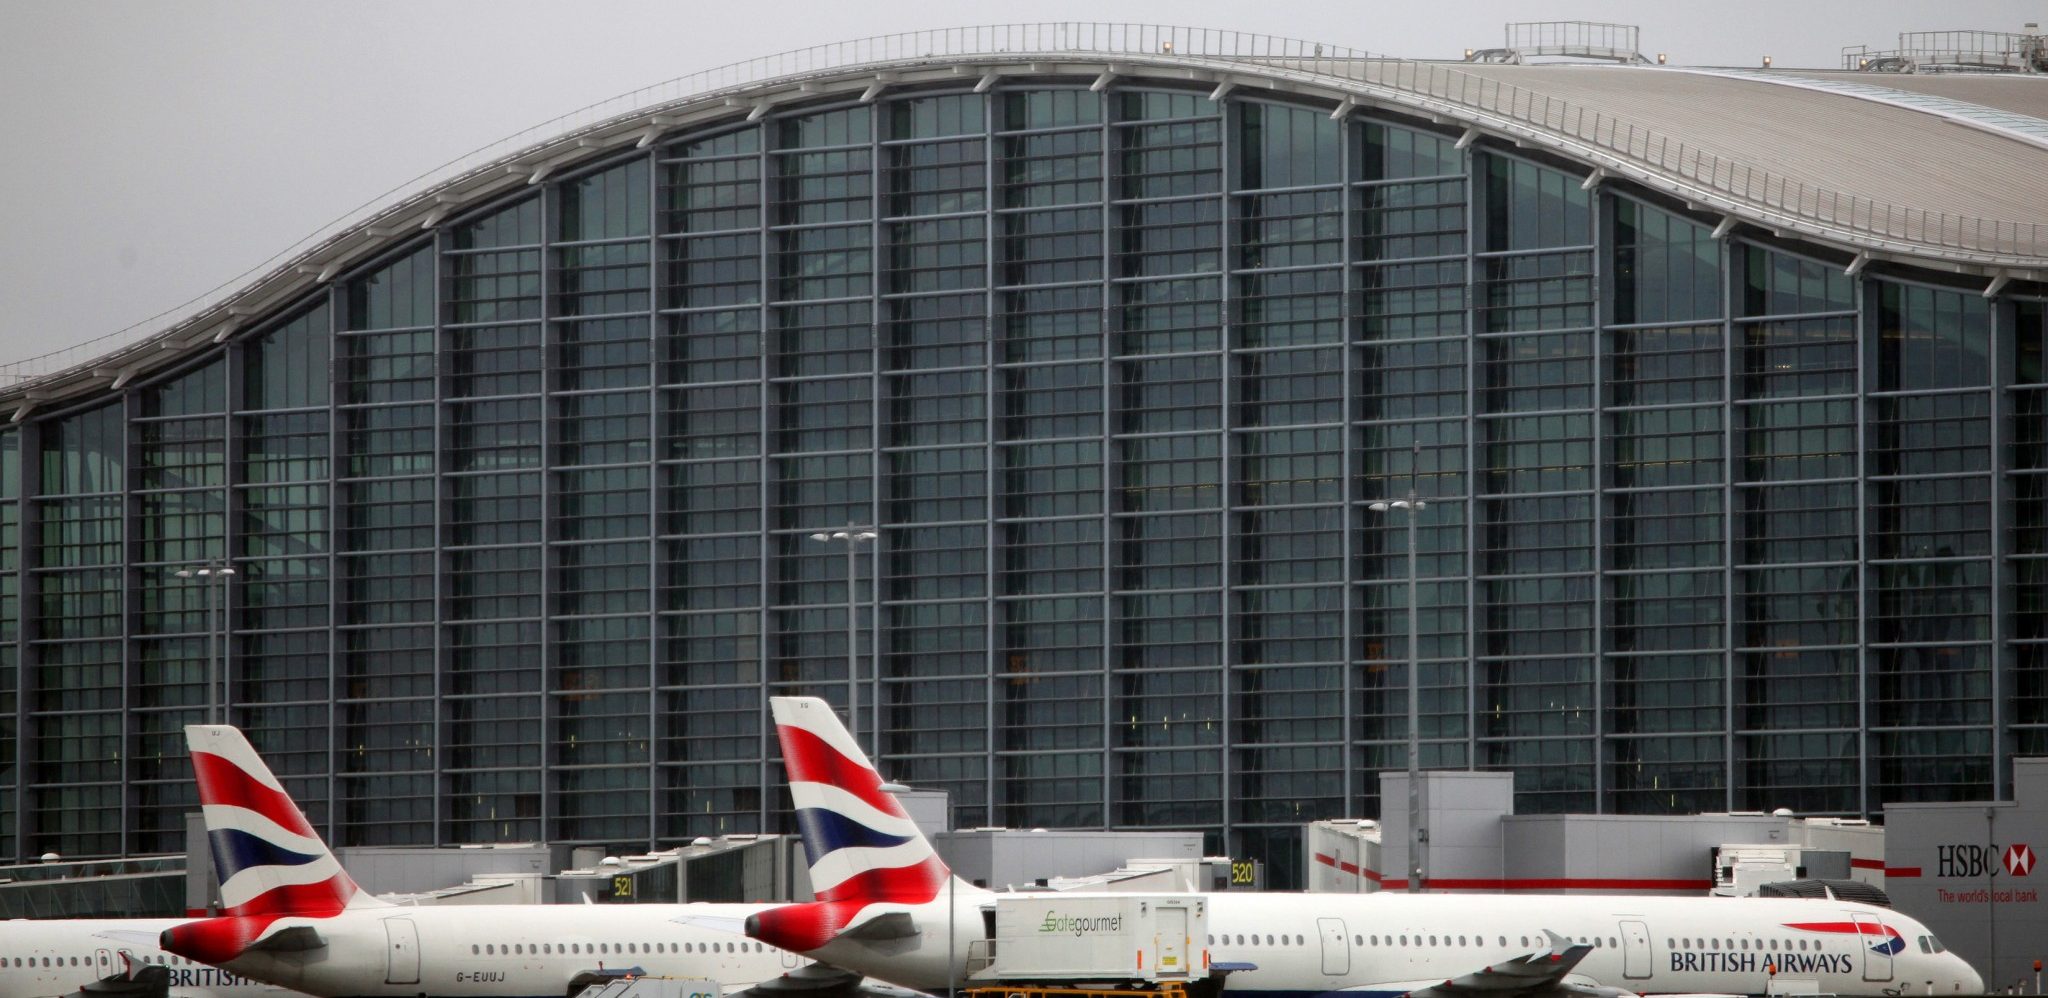 Virgin Atlantic and British Airways calls for action to reduce immigration queues at London Heathrow